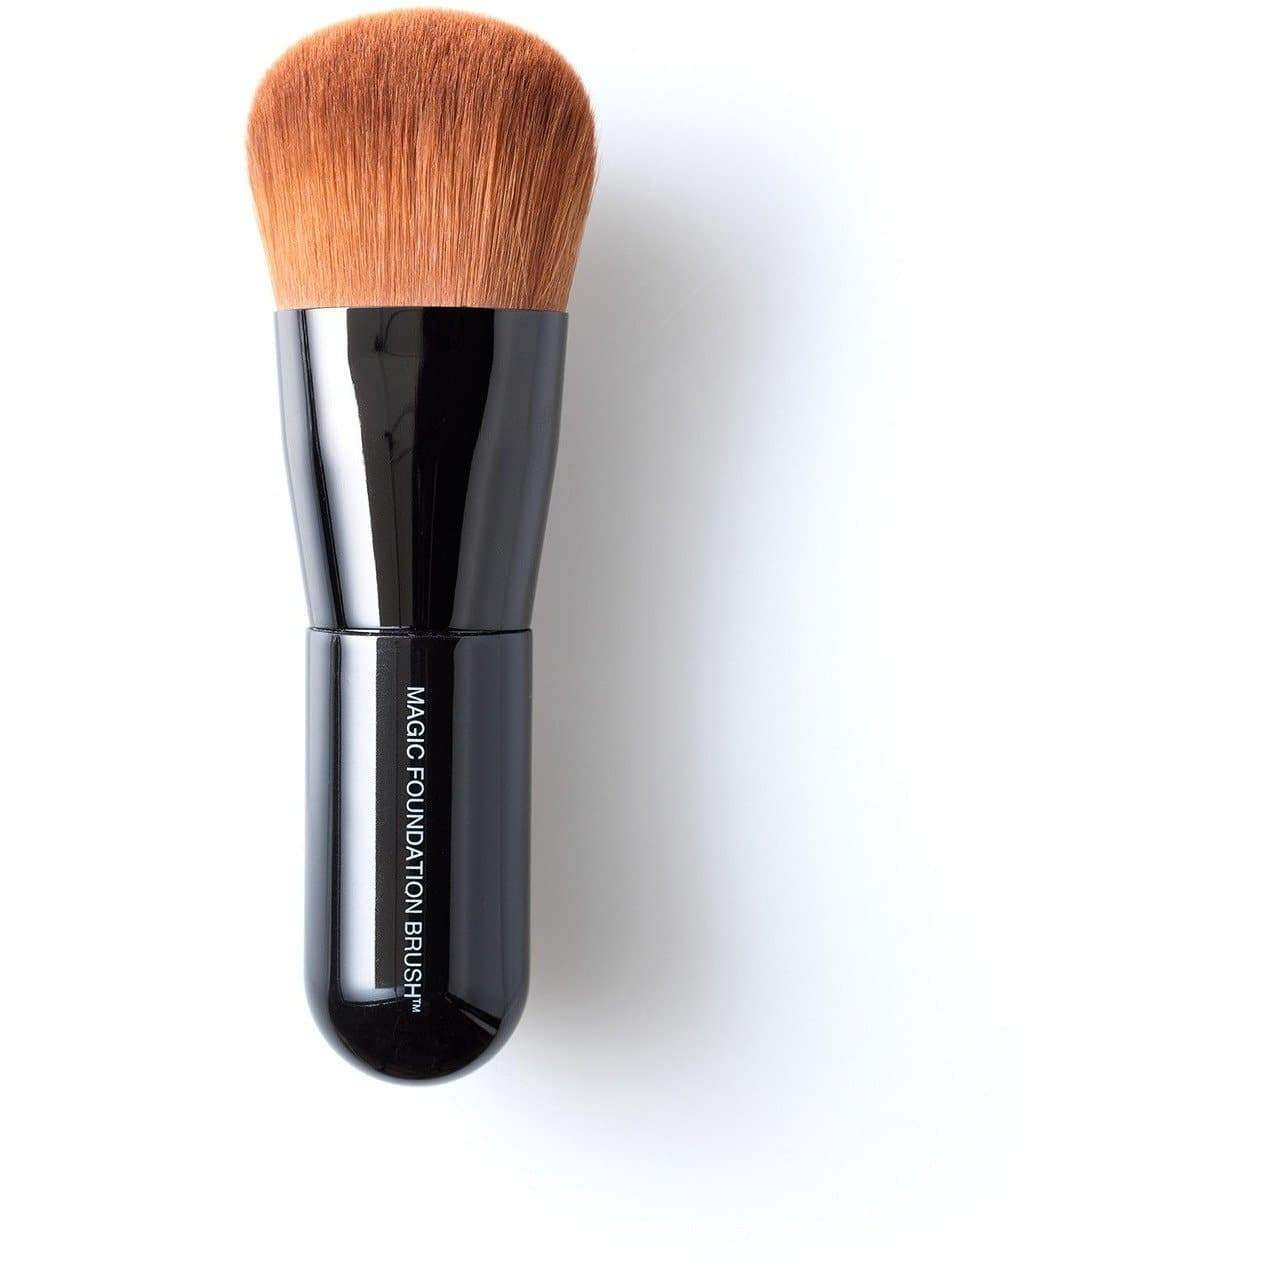 Chanel Makeup Brushes  Specktra: The online community for beauty